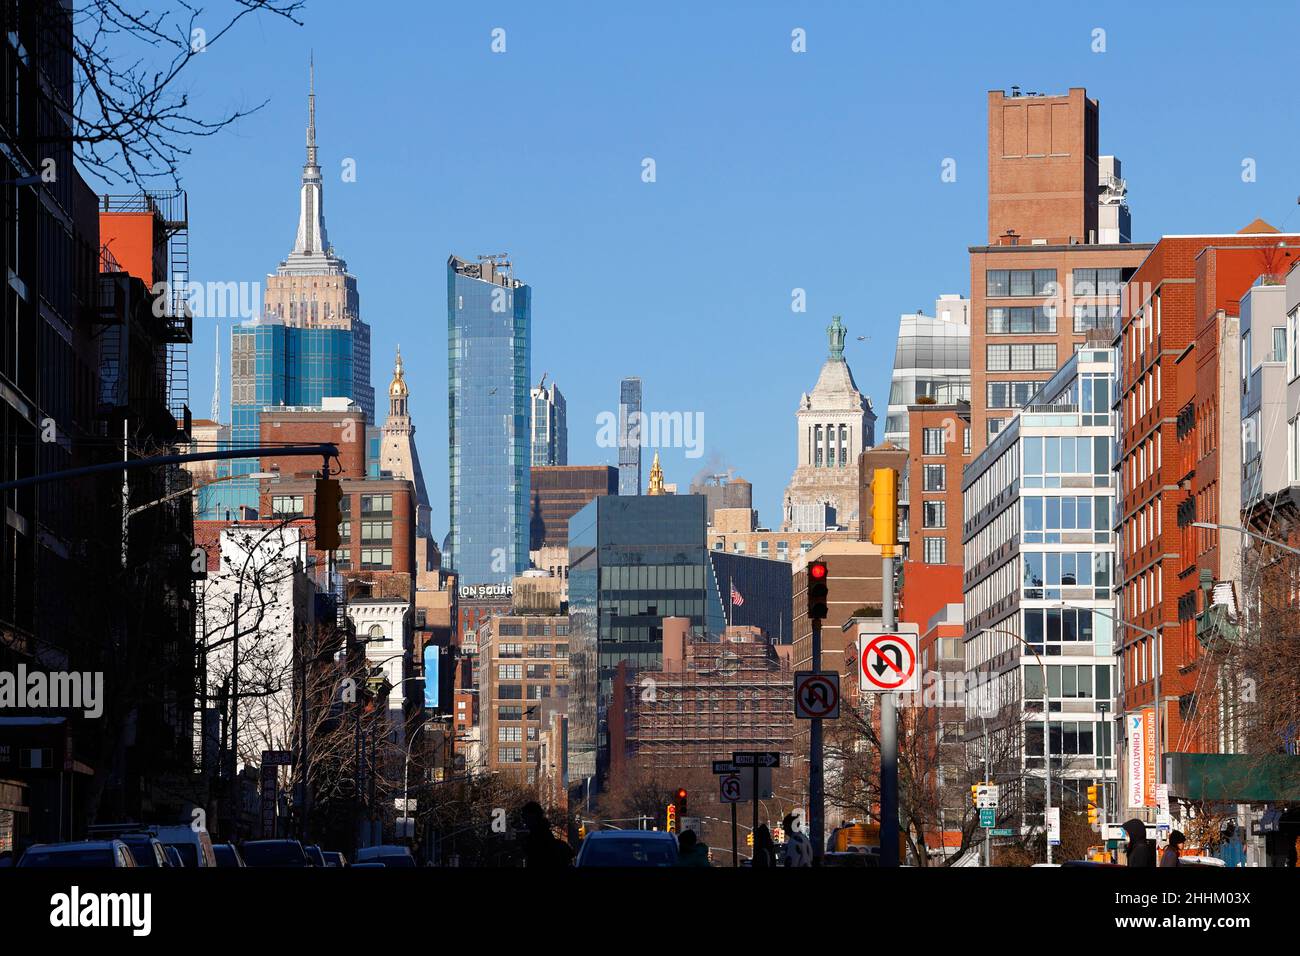 The slow obfuscation of the Midtown Manhattan NYC skyline as viewed from the Bowery, January 2022. Stock Photo